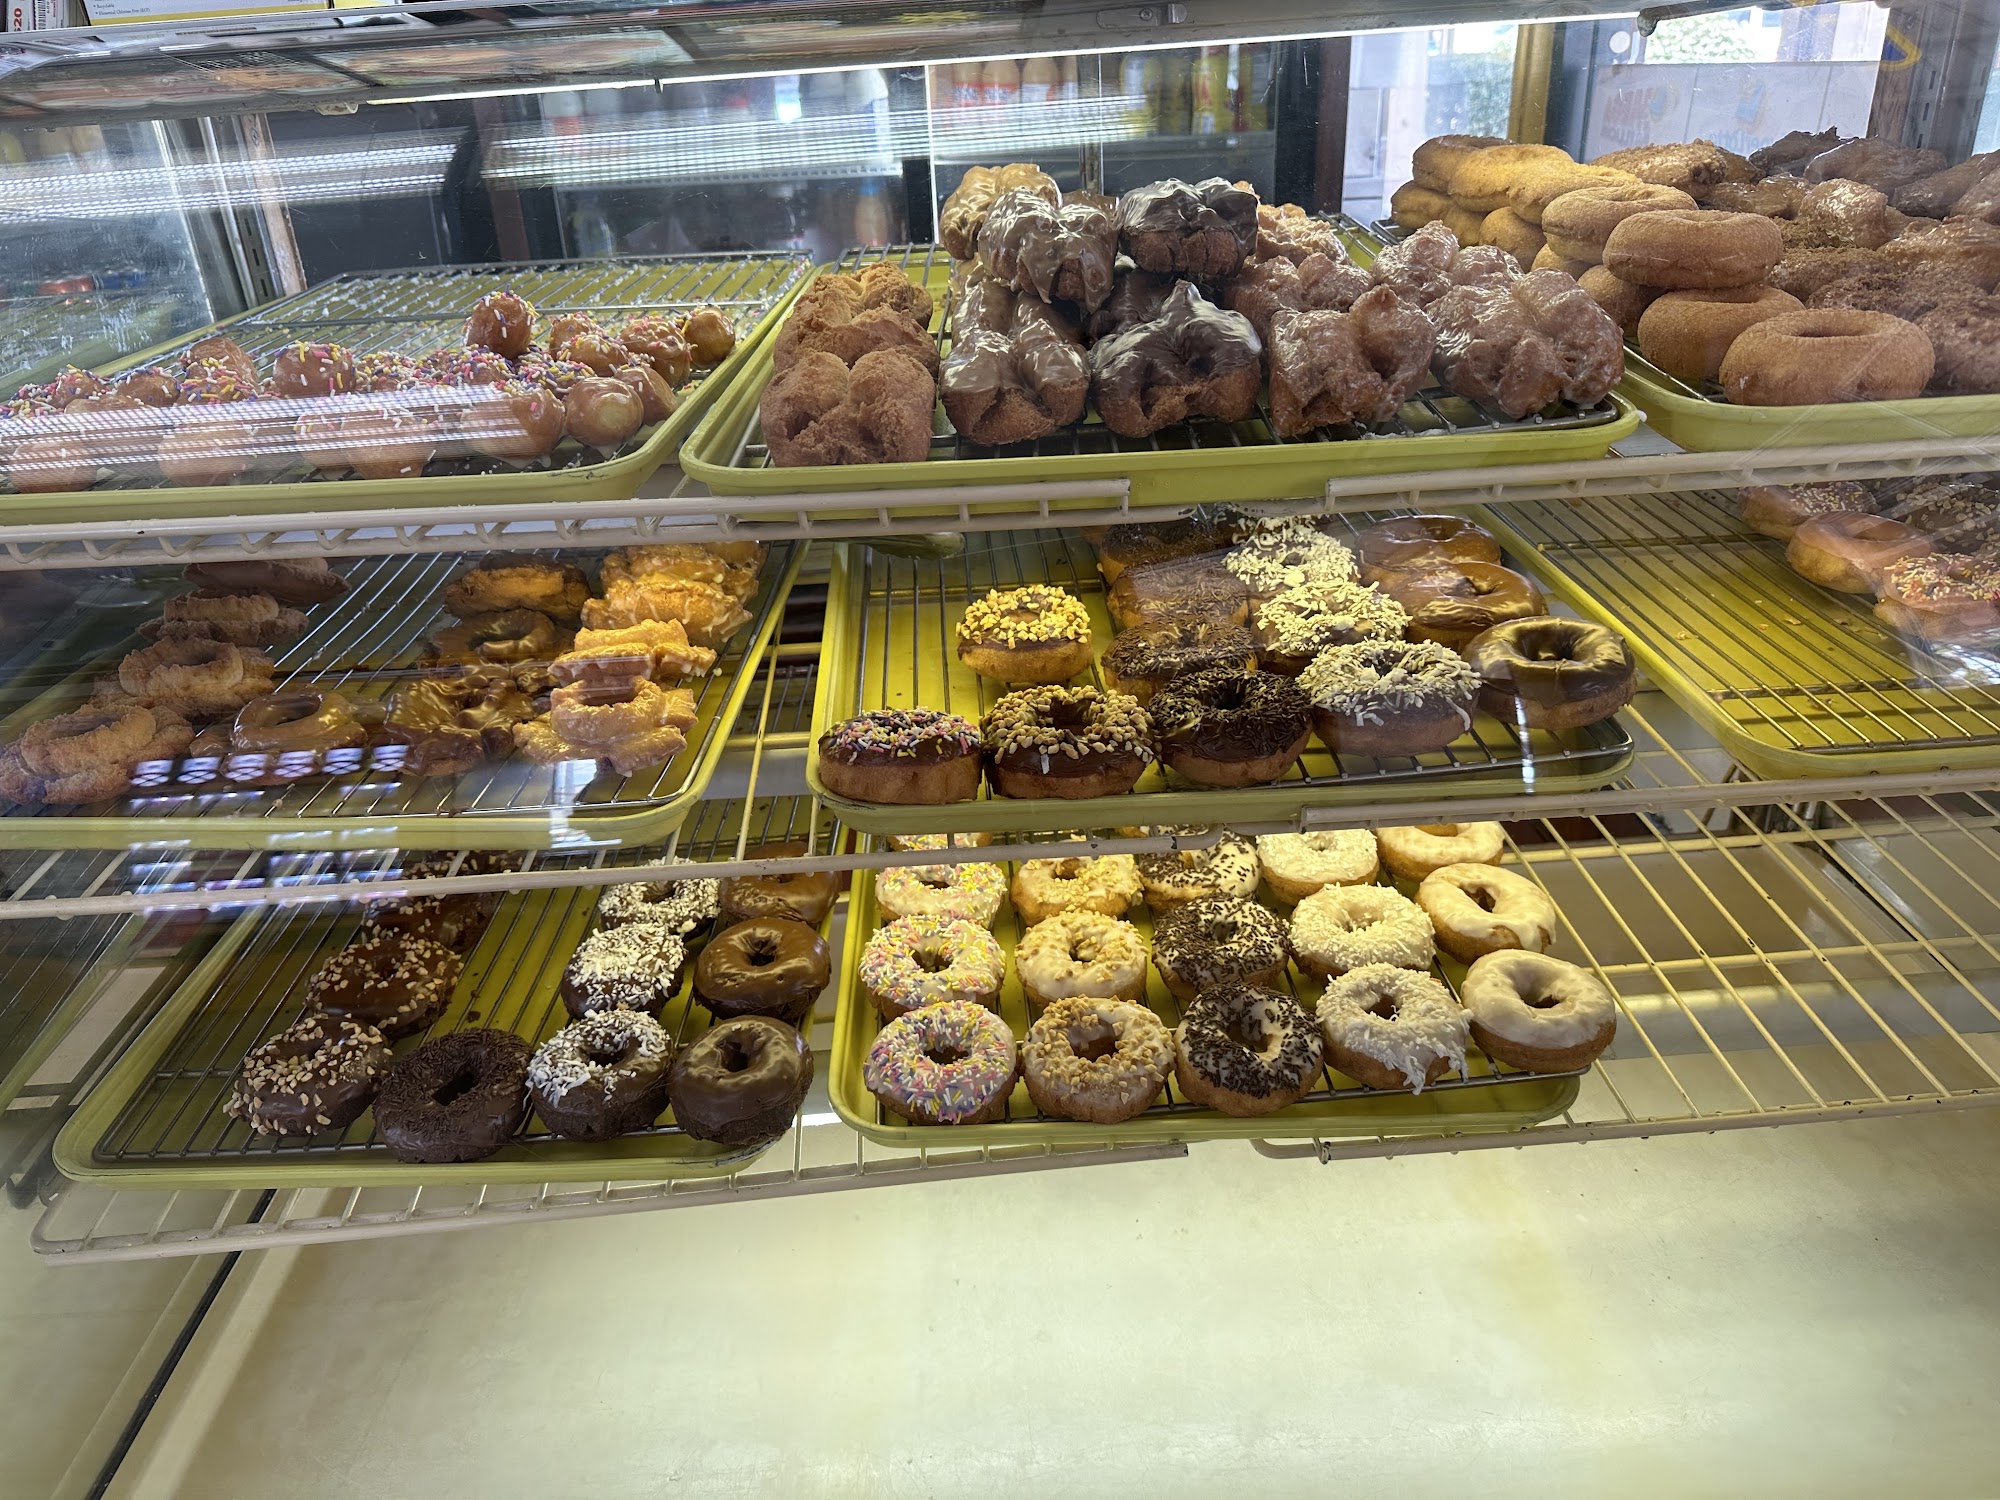 Mr. Blue's Donuts